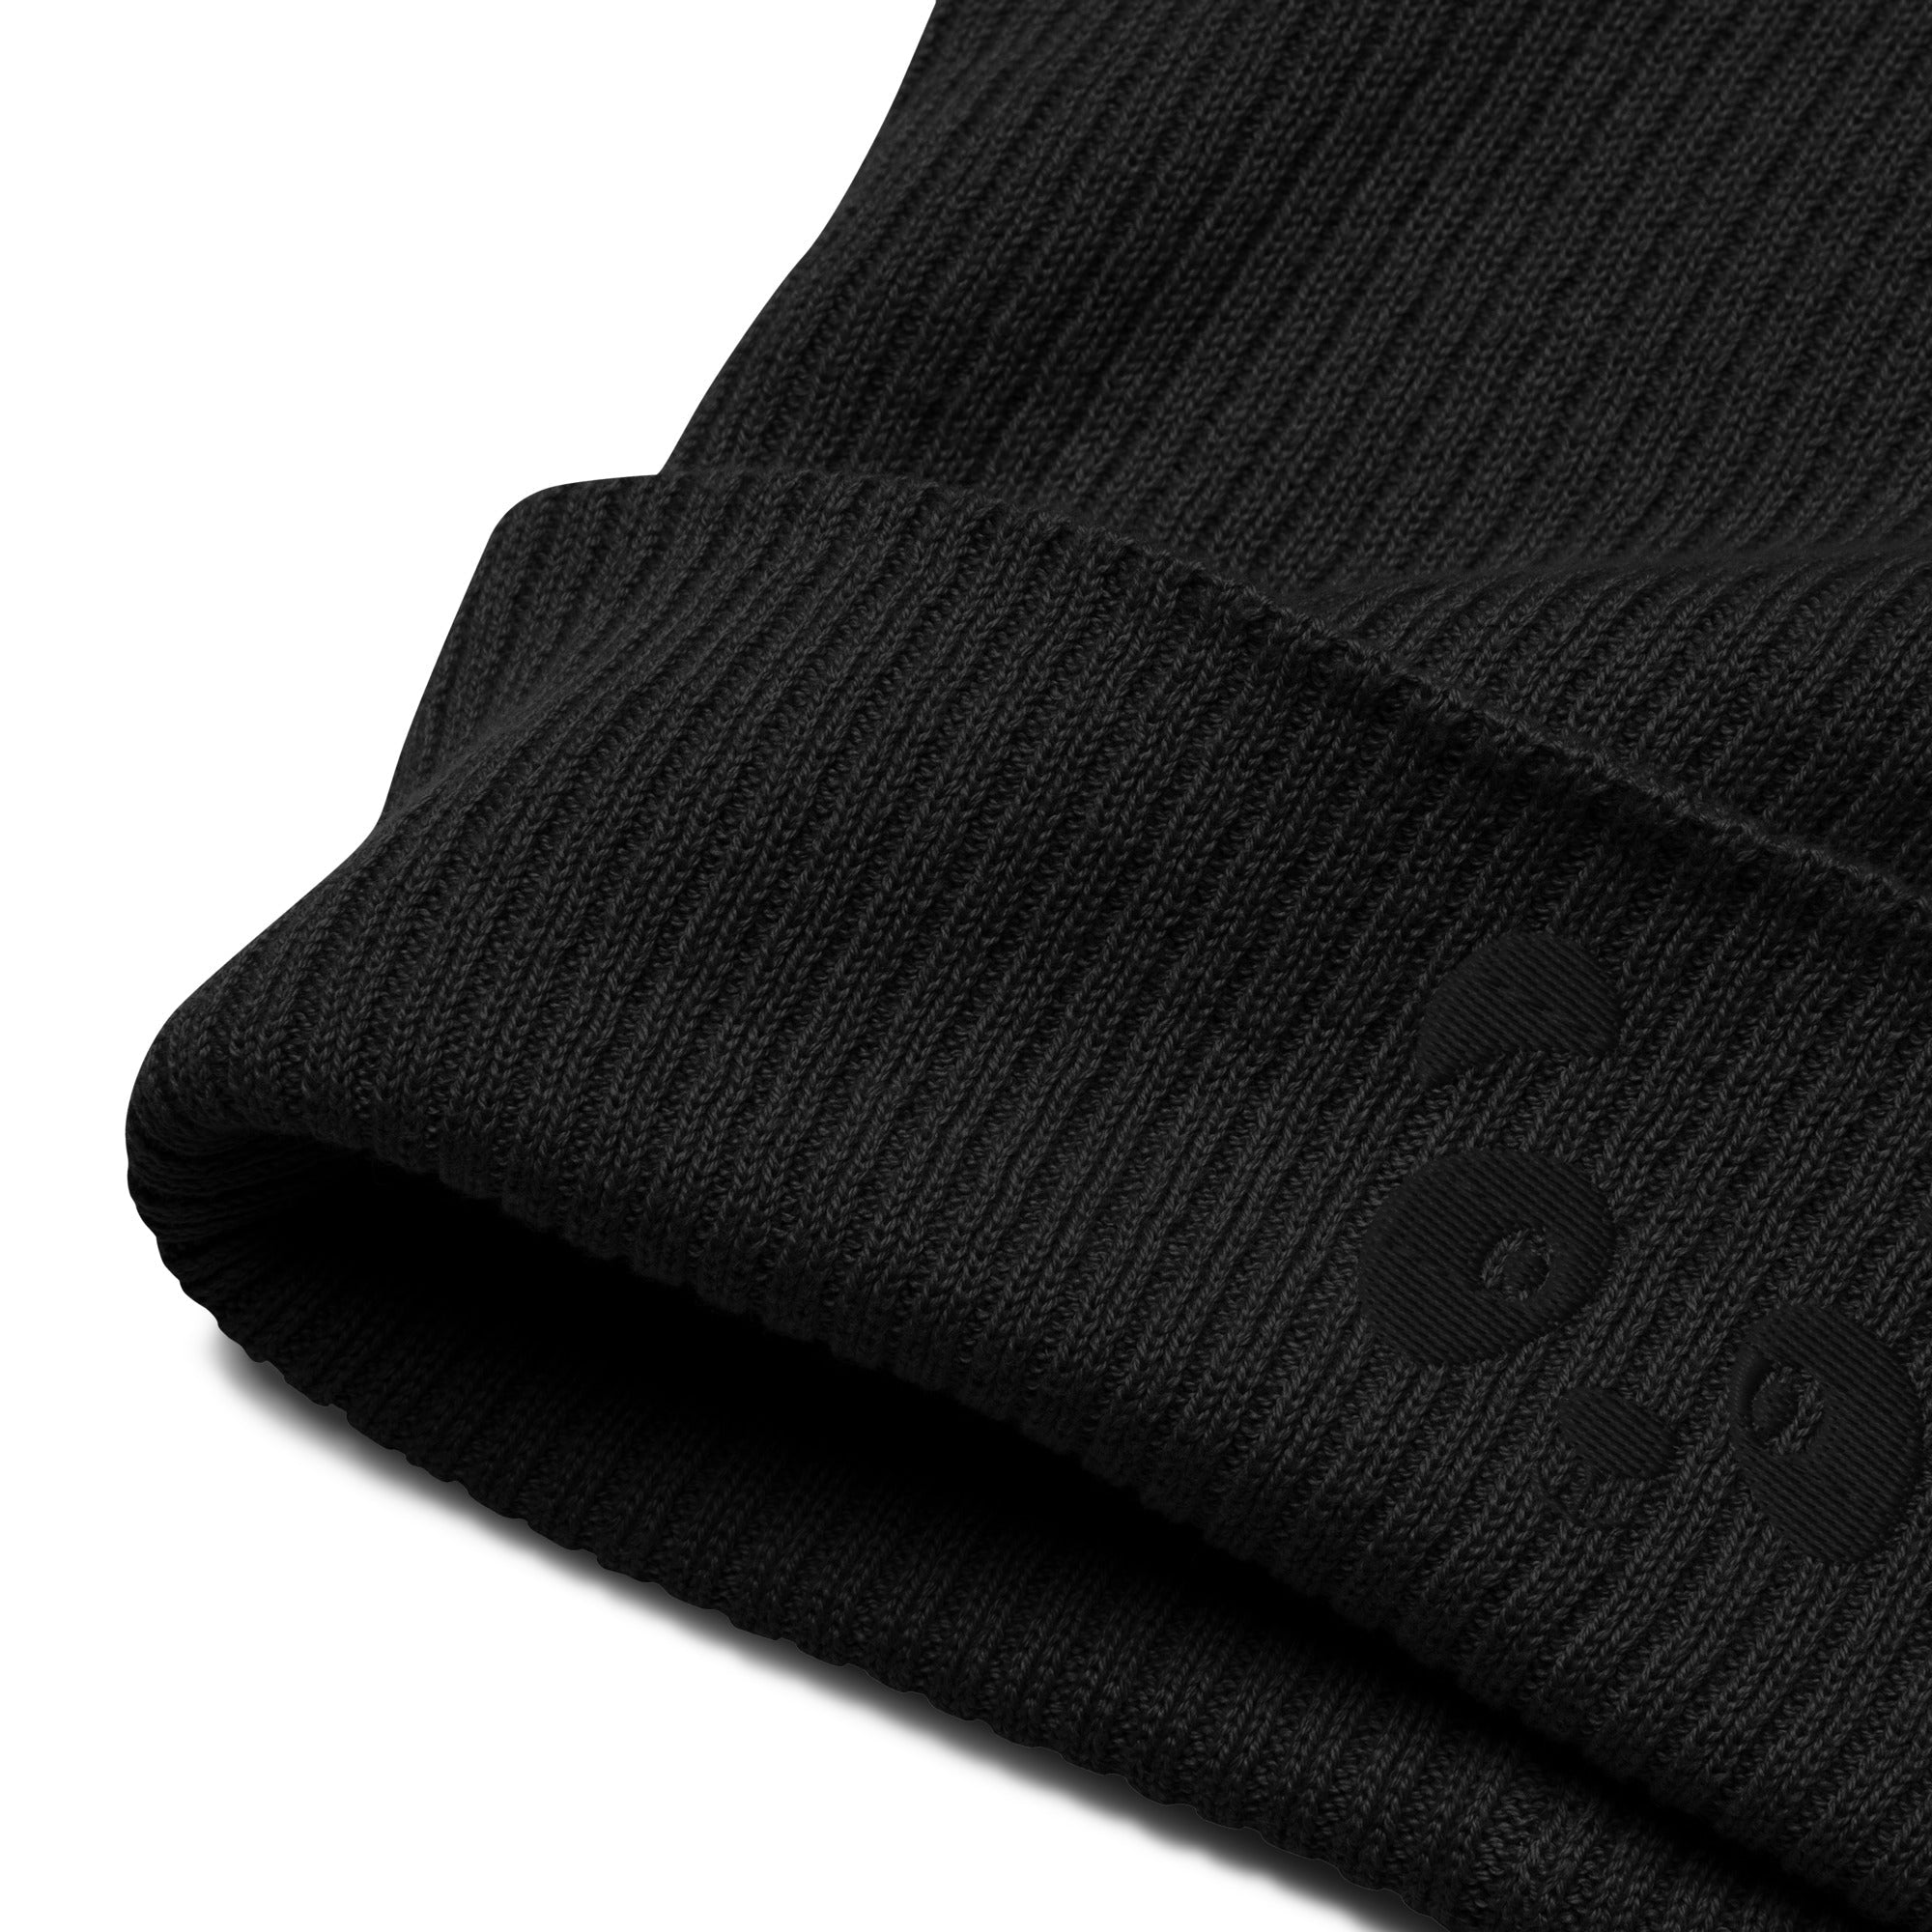 Panda face black embroidered, organic cotton ribbed beanie-30